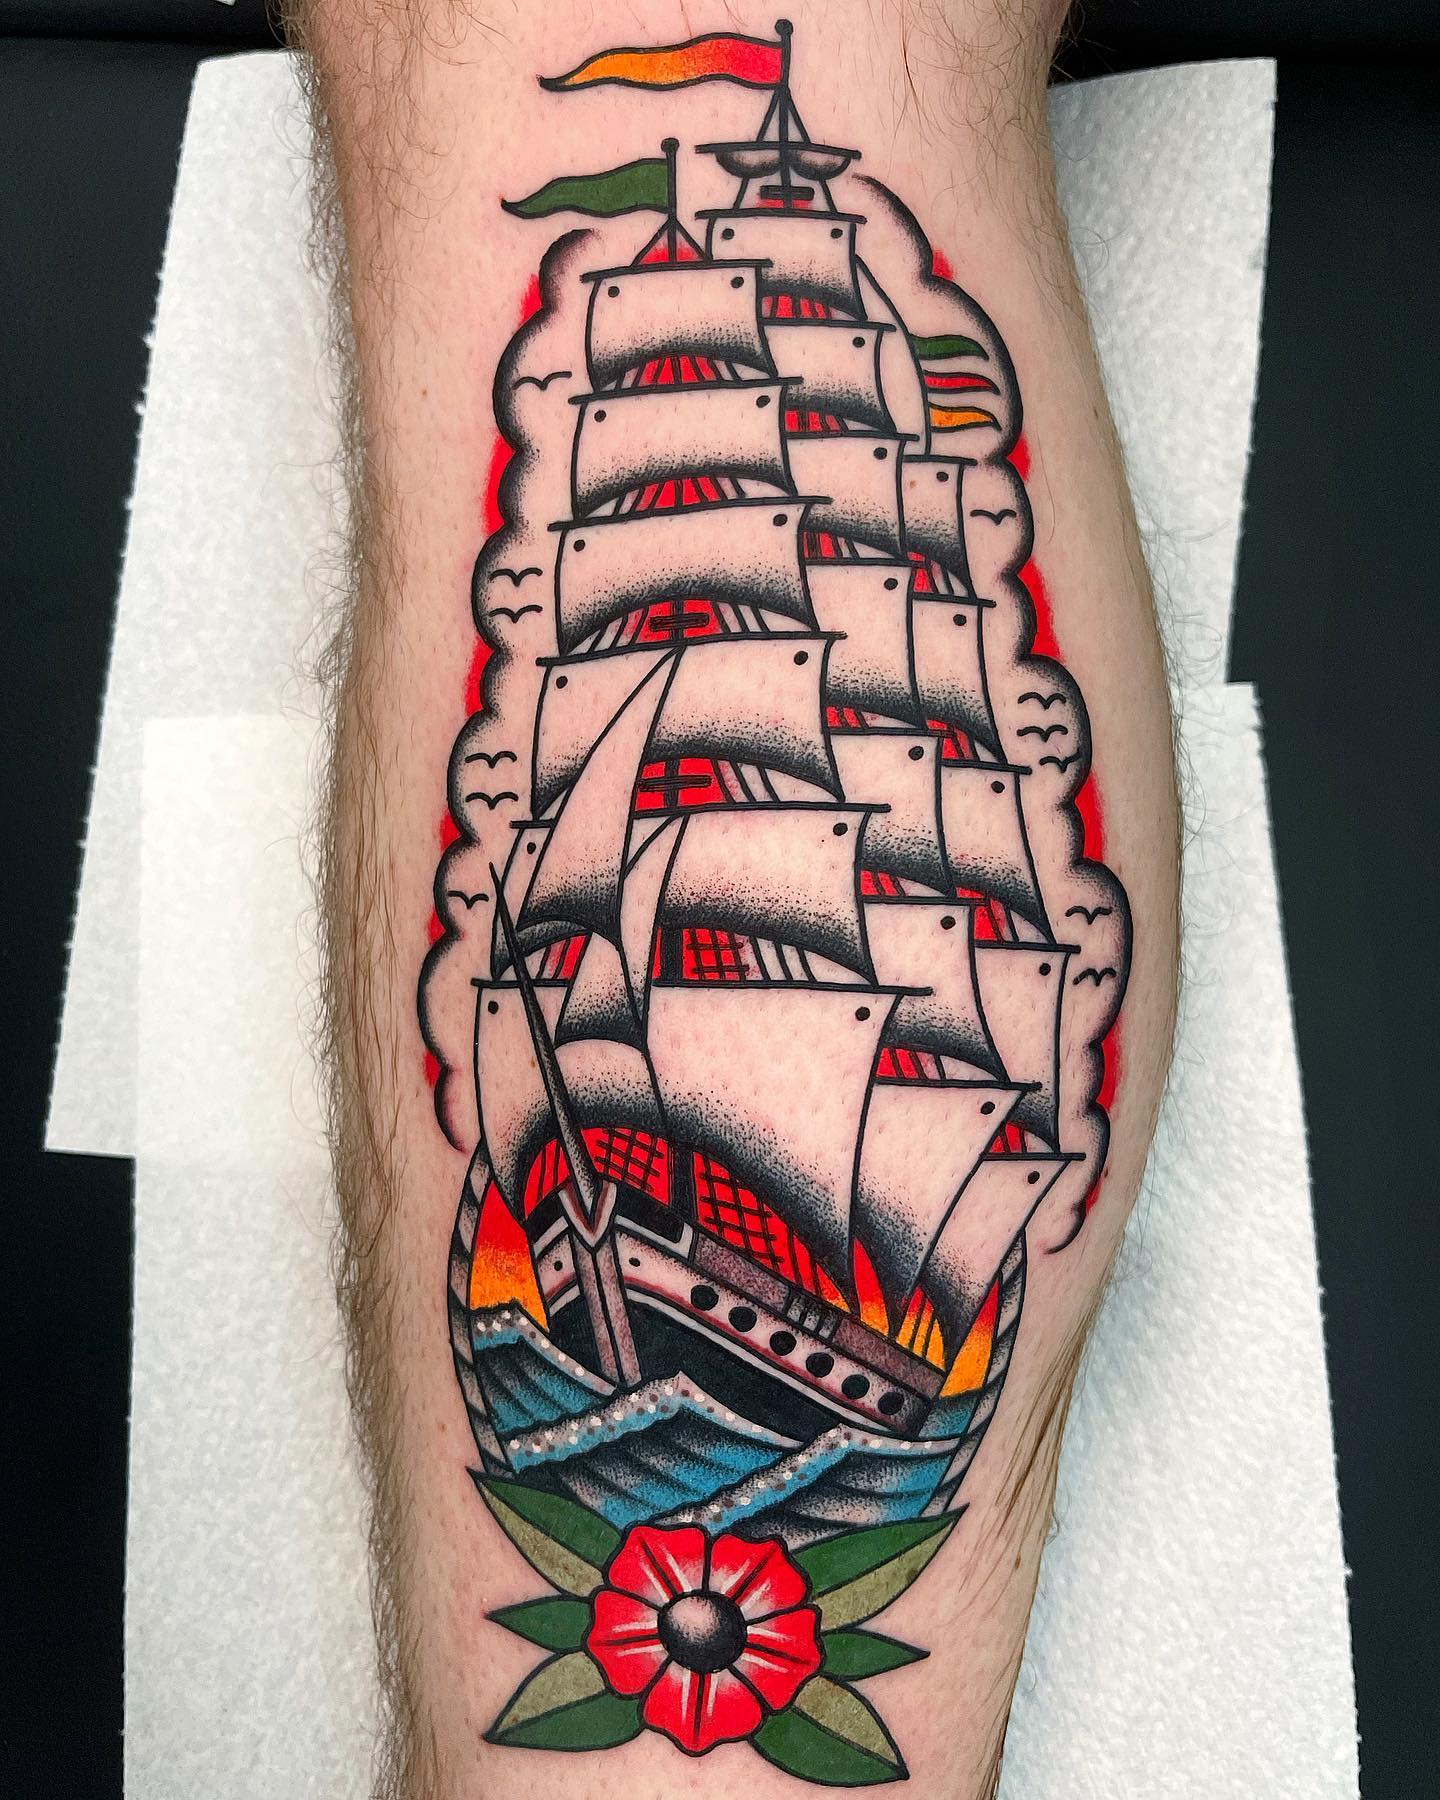 9 Stunning Ship Tattoo Designs and Ideas | Styles At Life